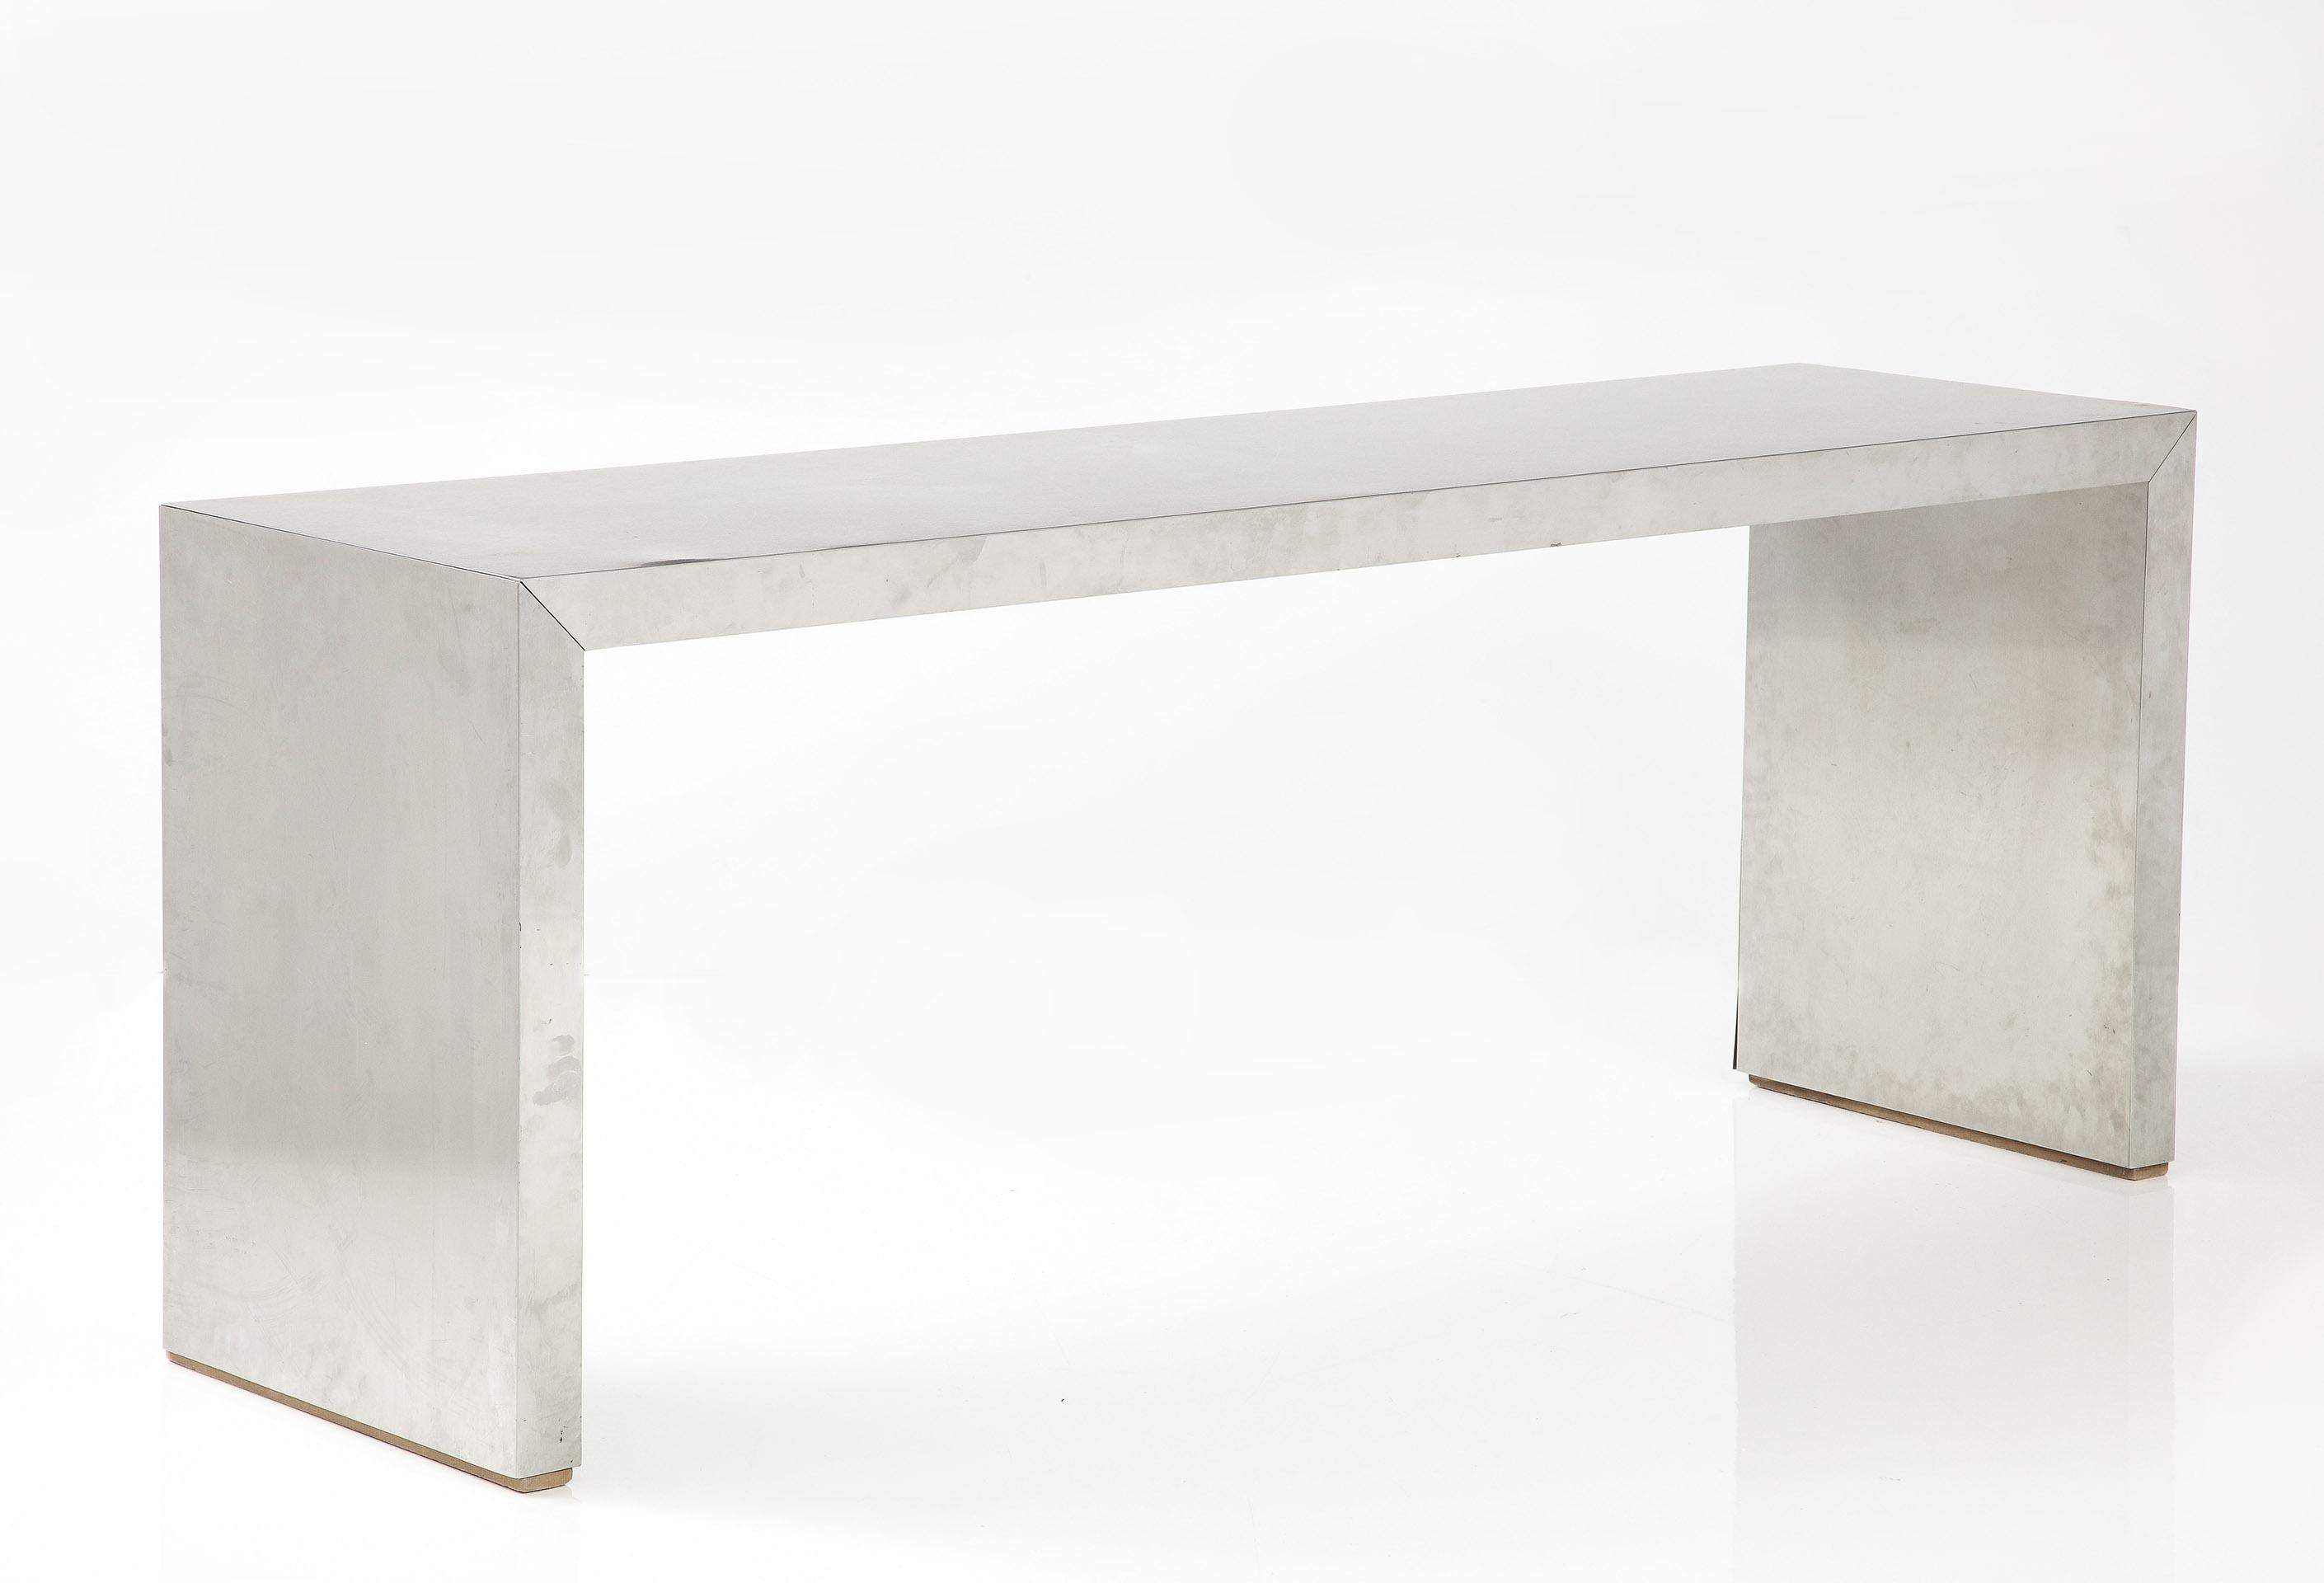 The parsons form console with a brushed steel clad surface and finished on all sides.